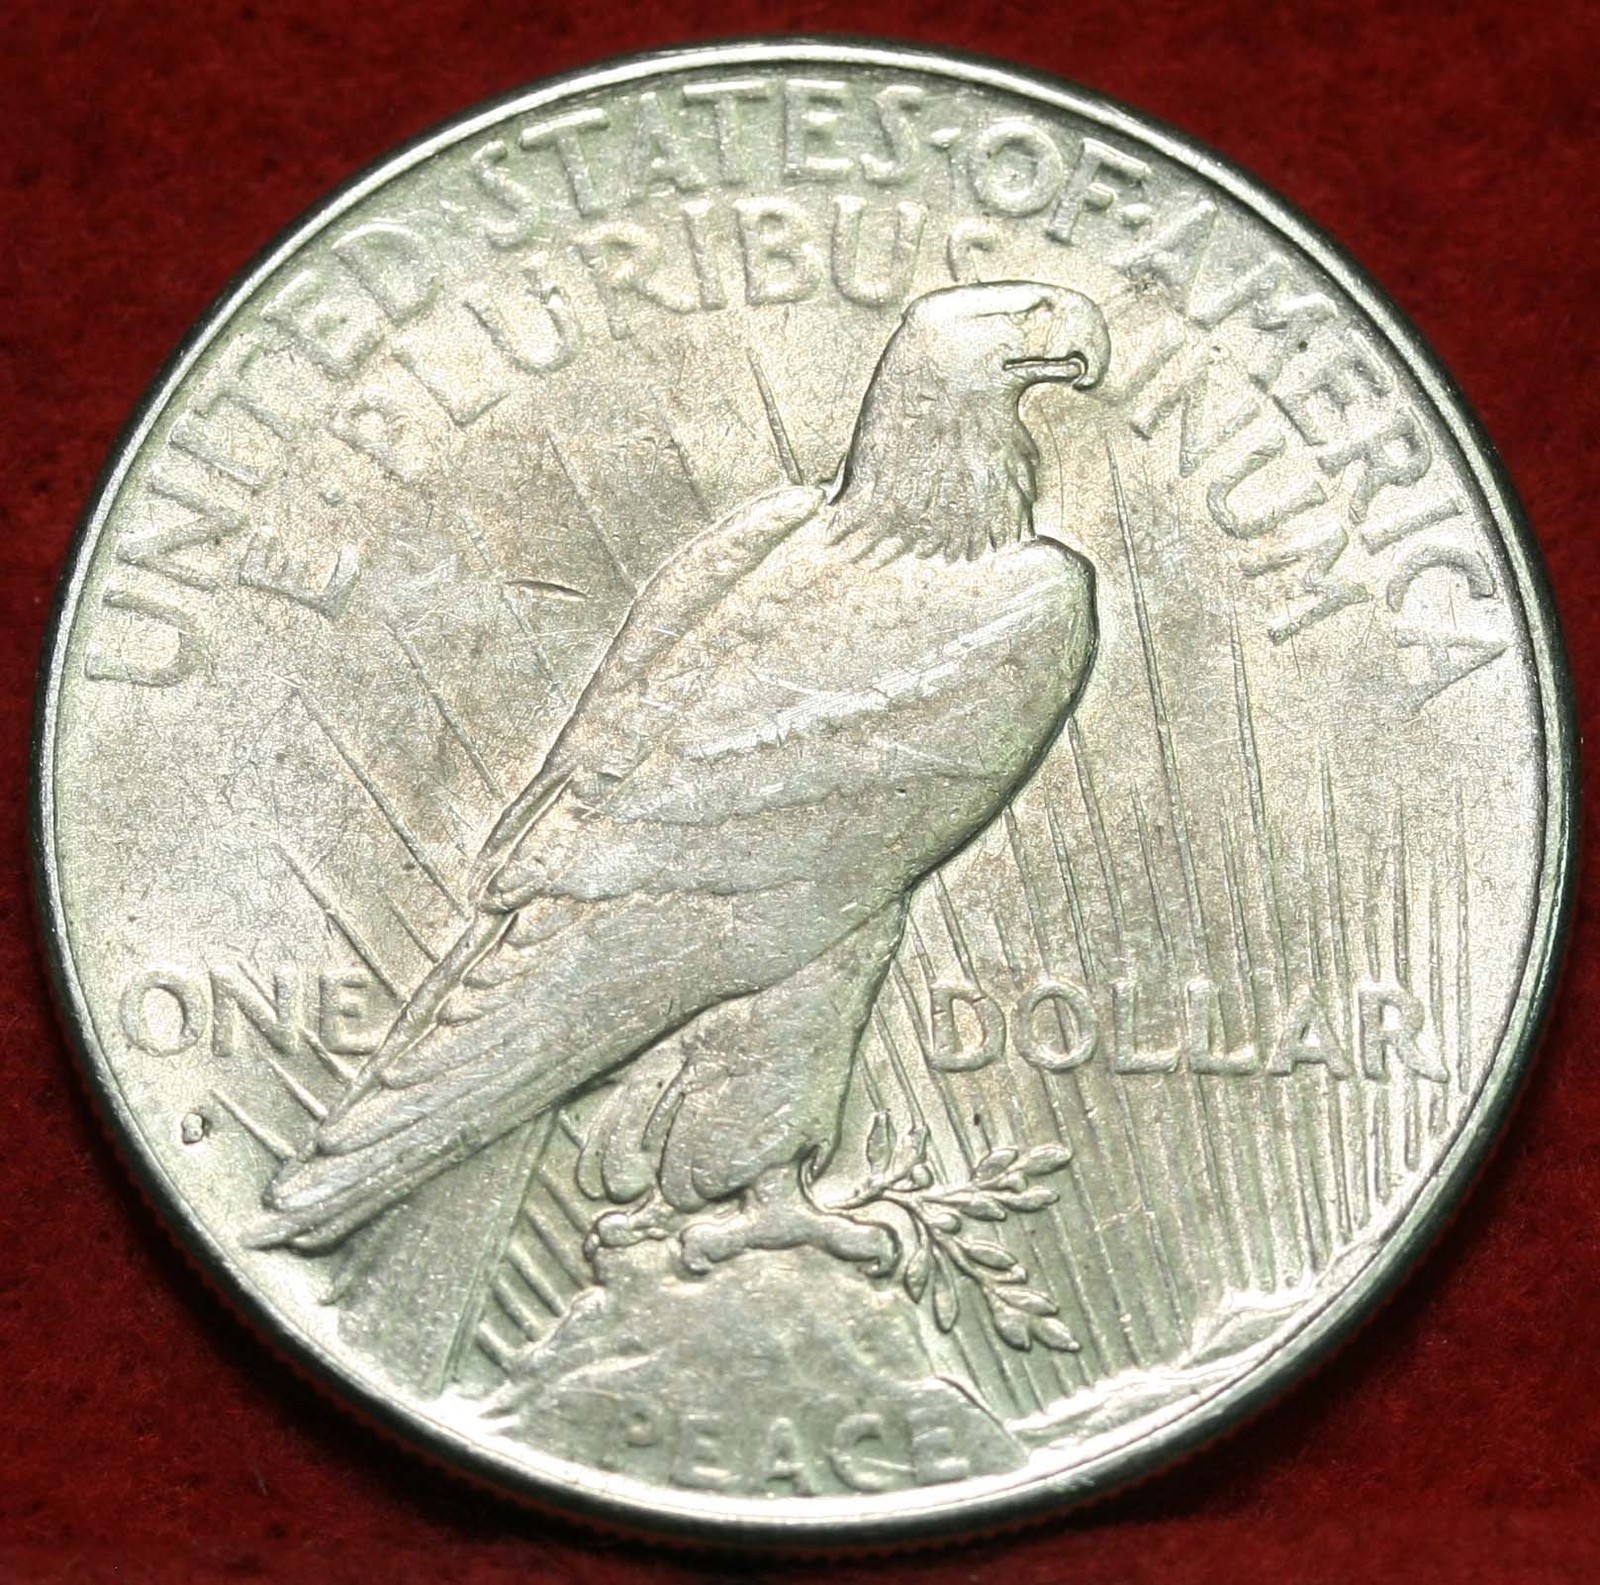 a large silver penny sits on a red surface